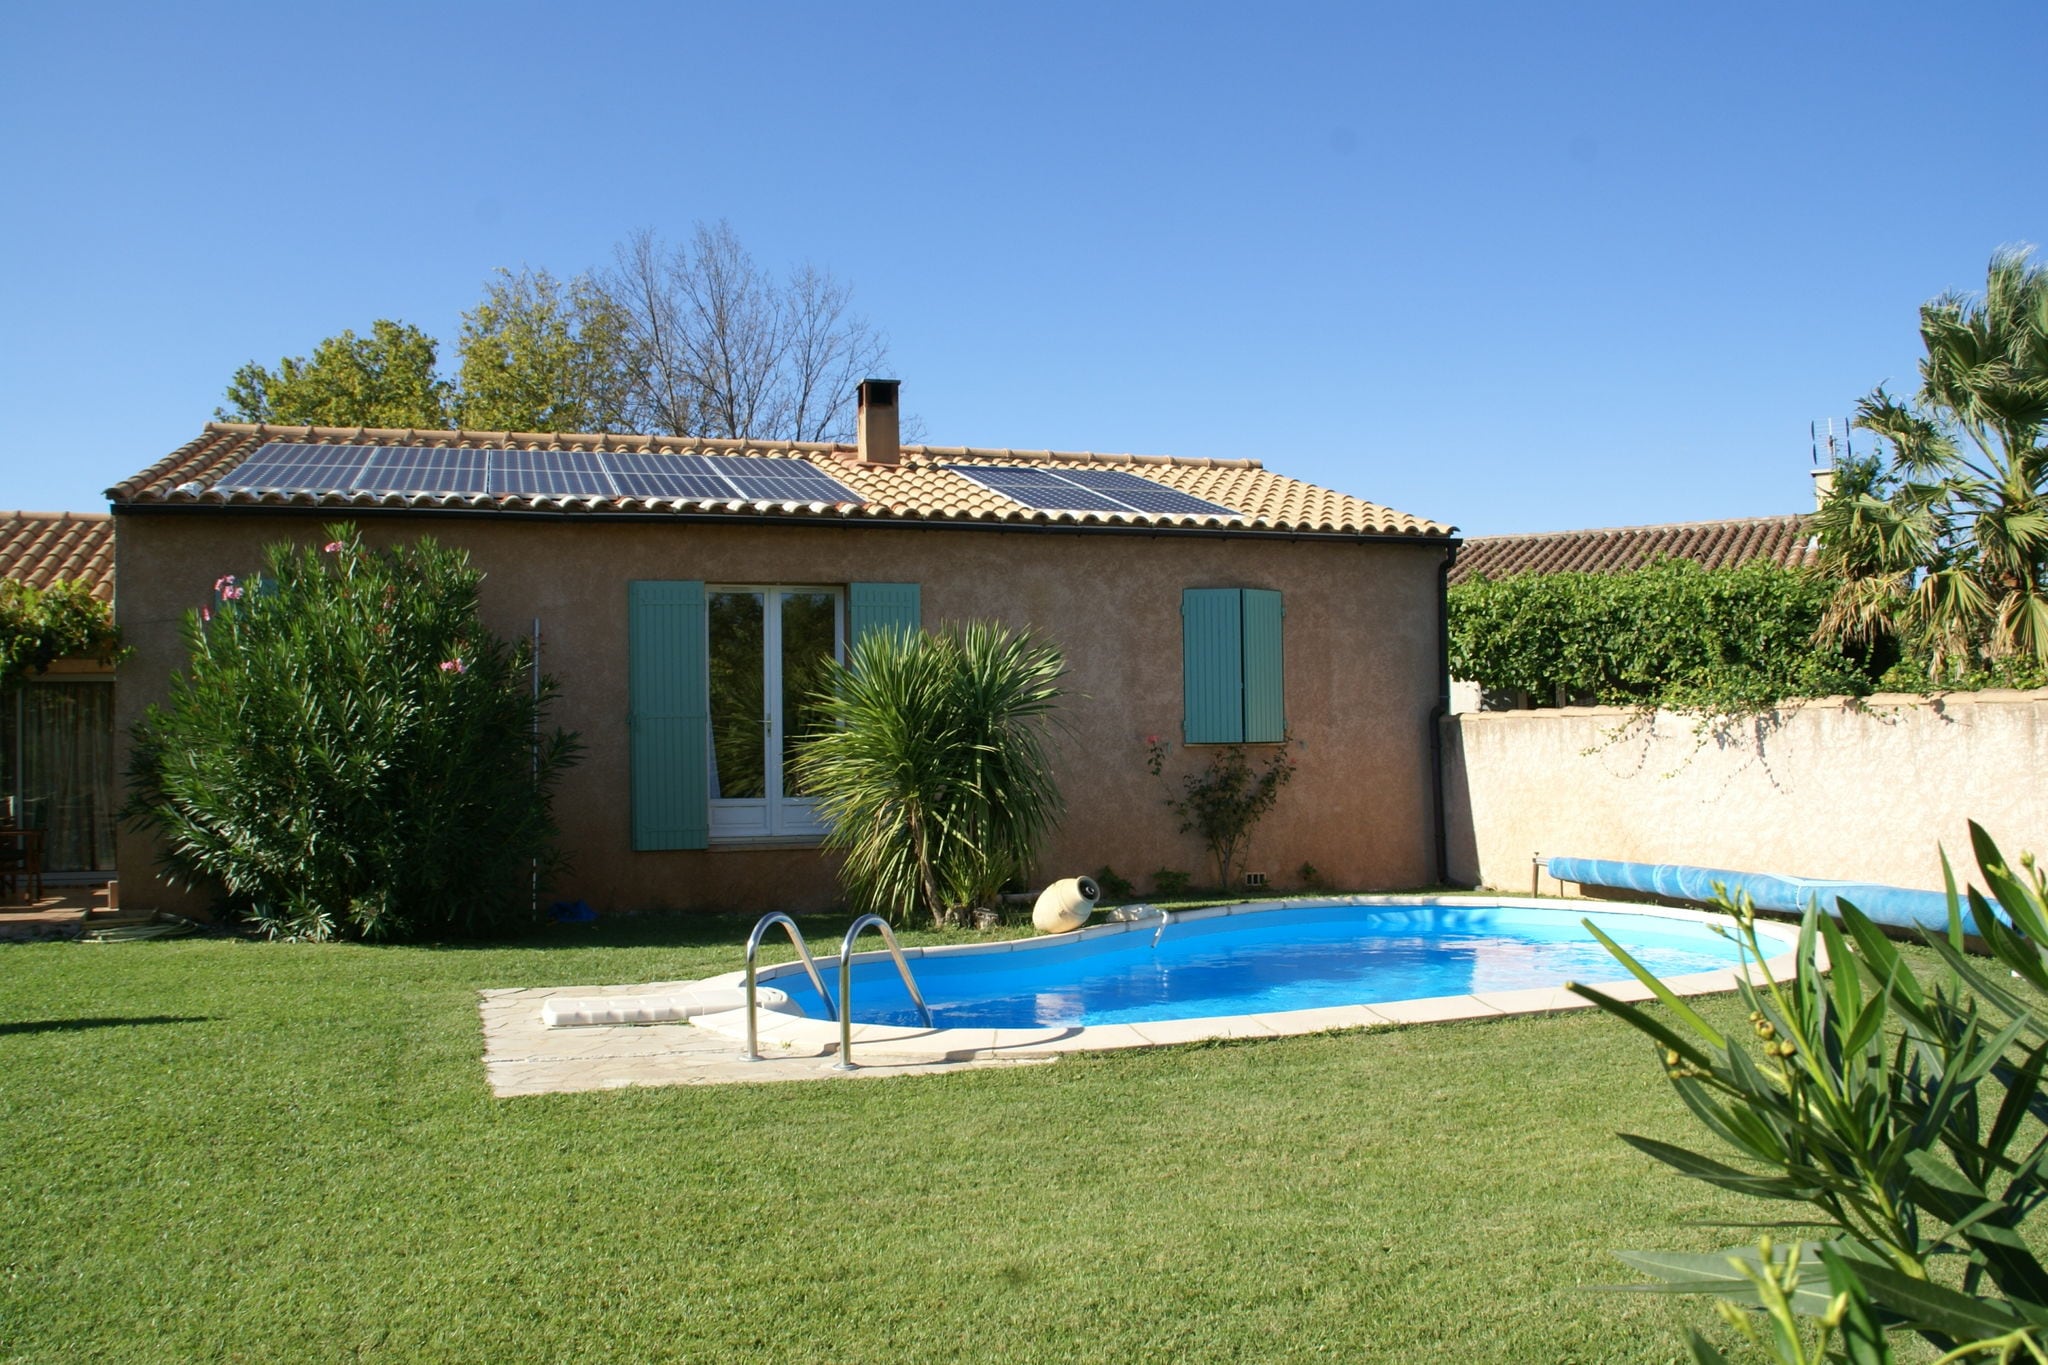 Colourful Holiday Home in Noves with Swimming Pool